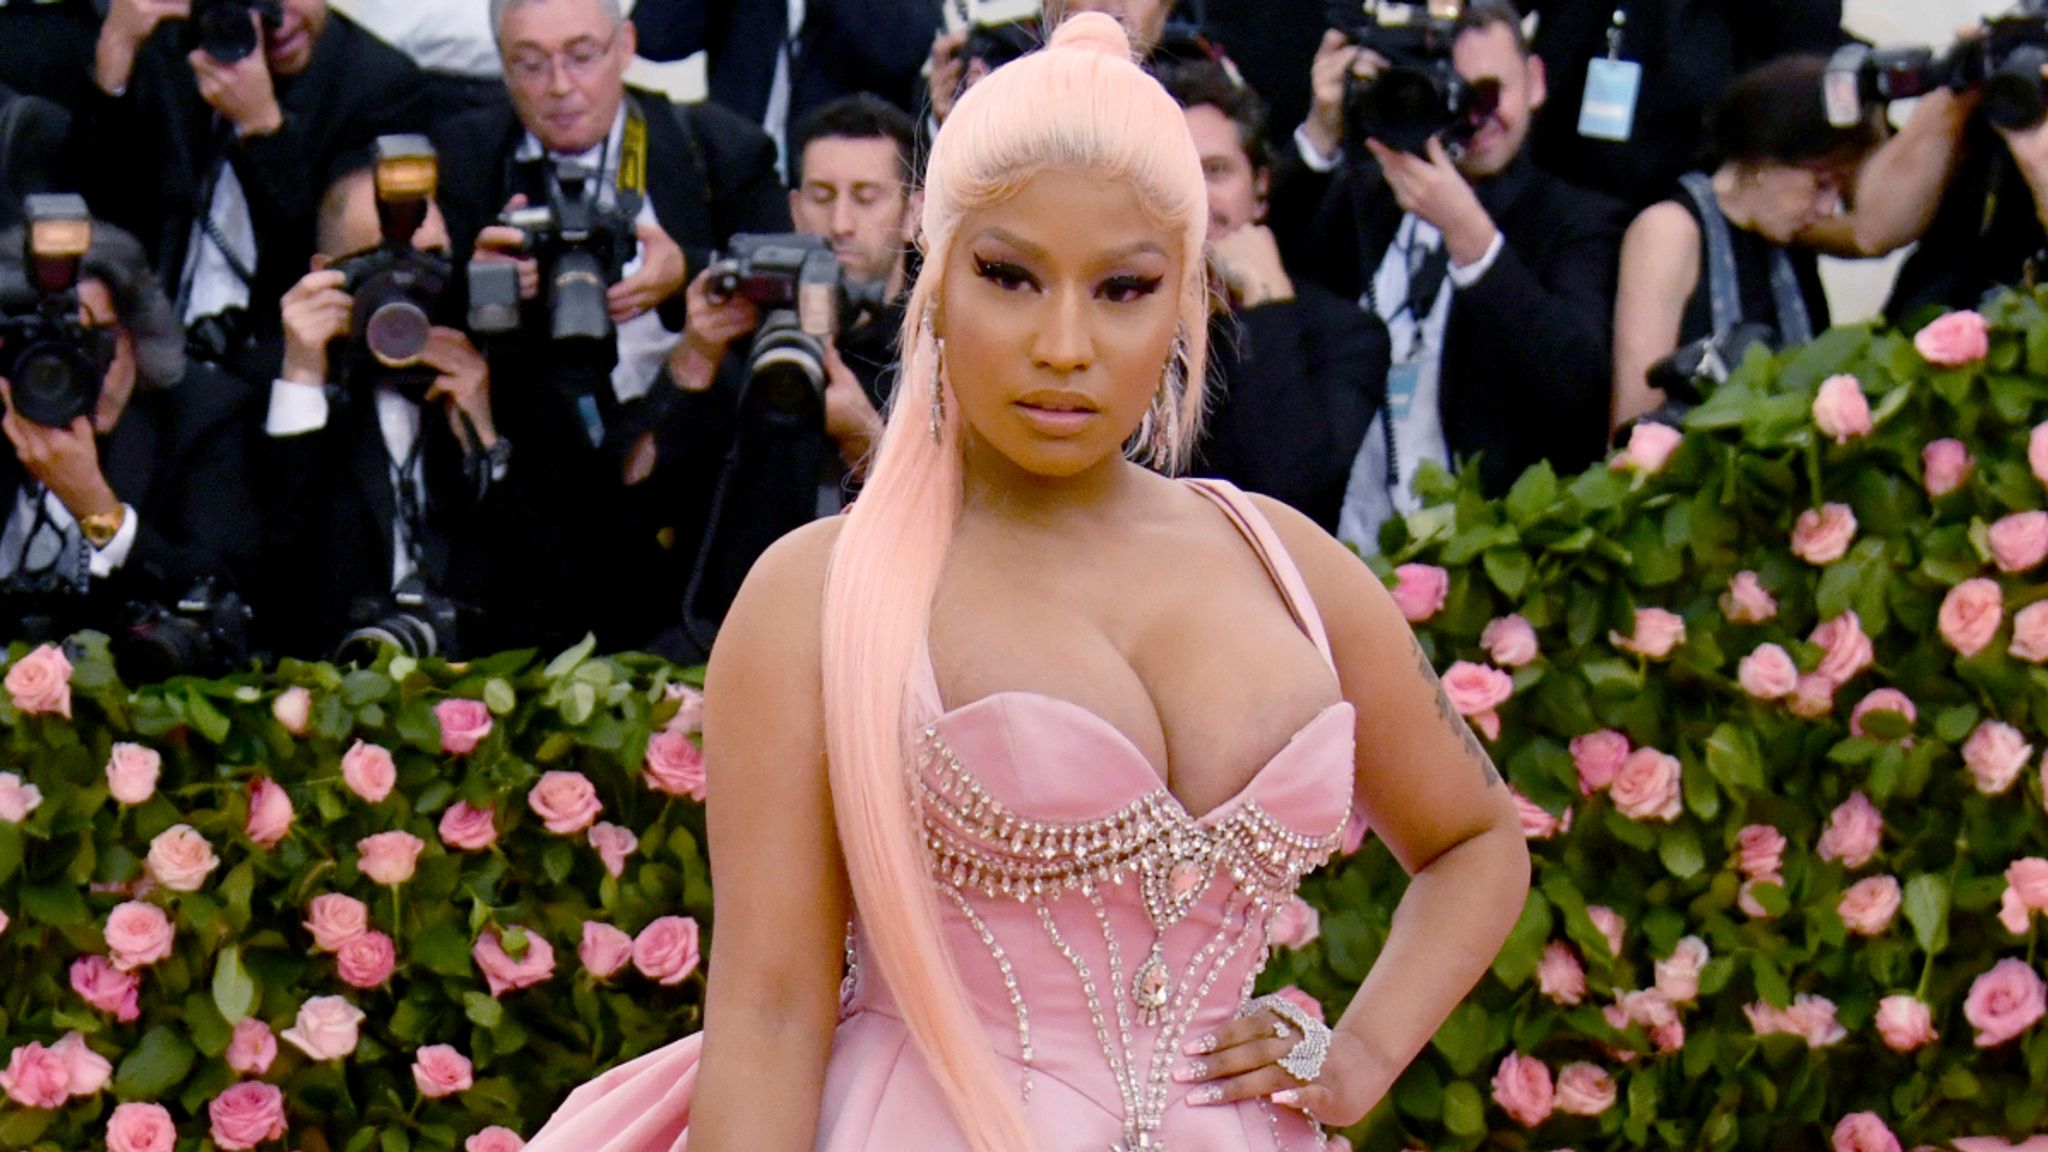 Nicki Minaj Tweets About Covid-19 Vaccines And Her Cousin'S Friend'S  Swollen Testicles | Ents & Arts News | Sky News